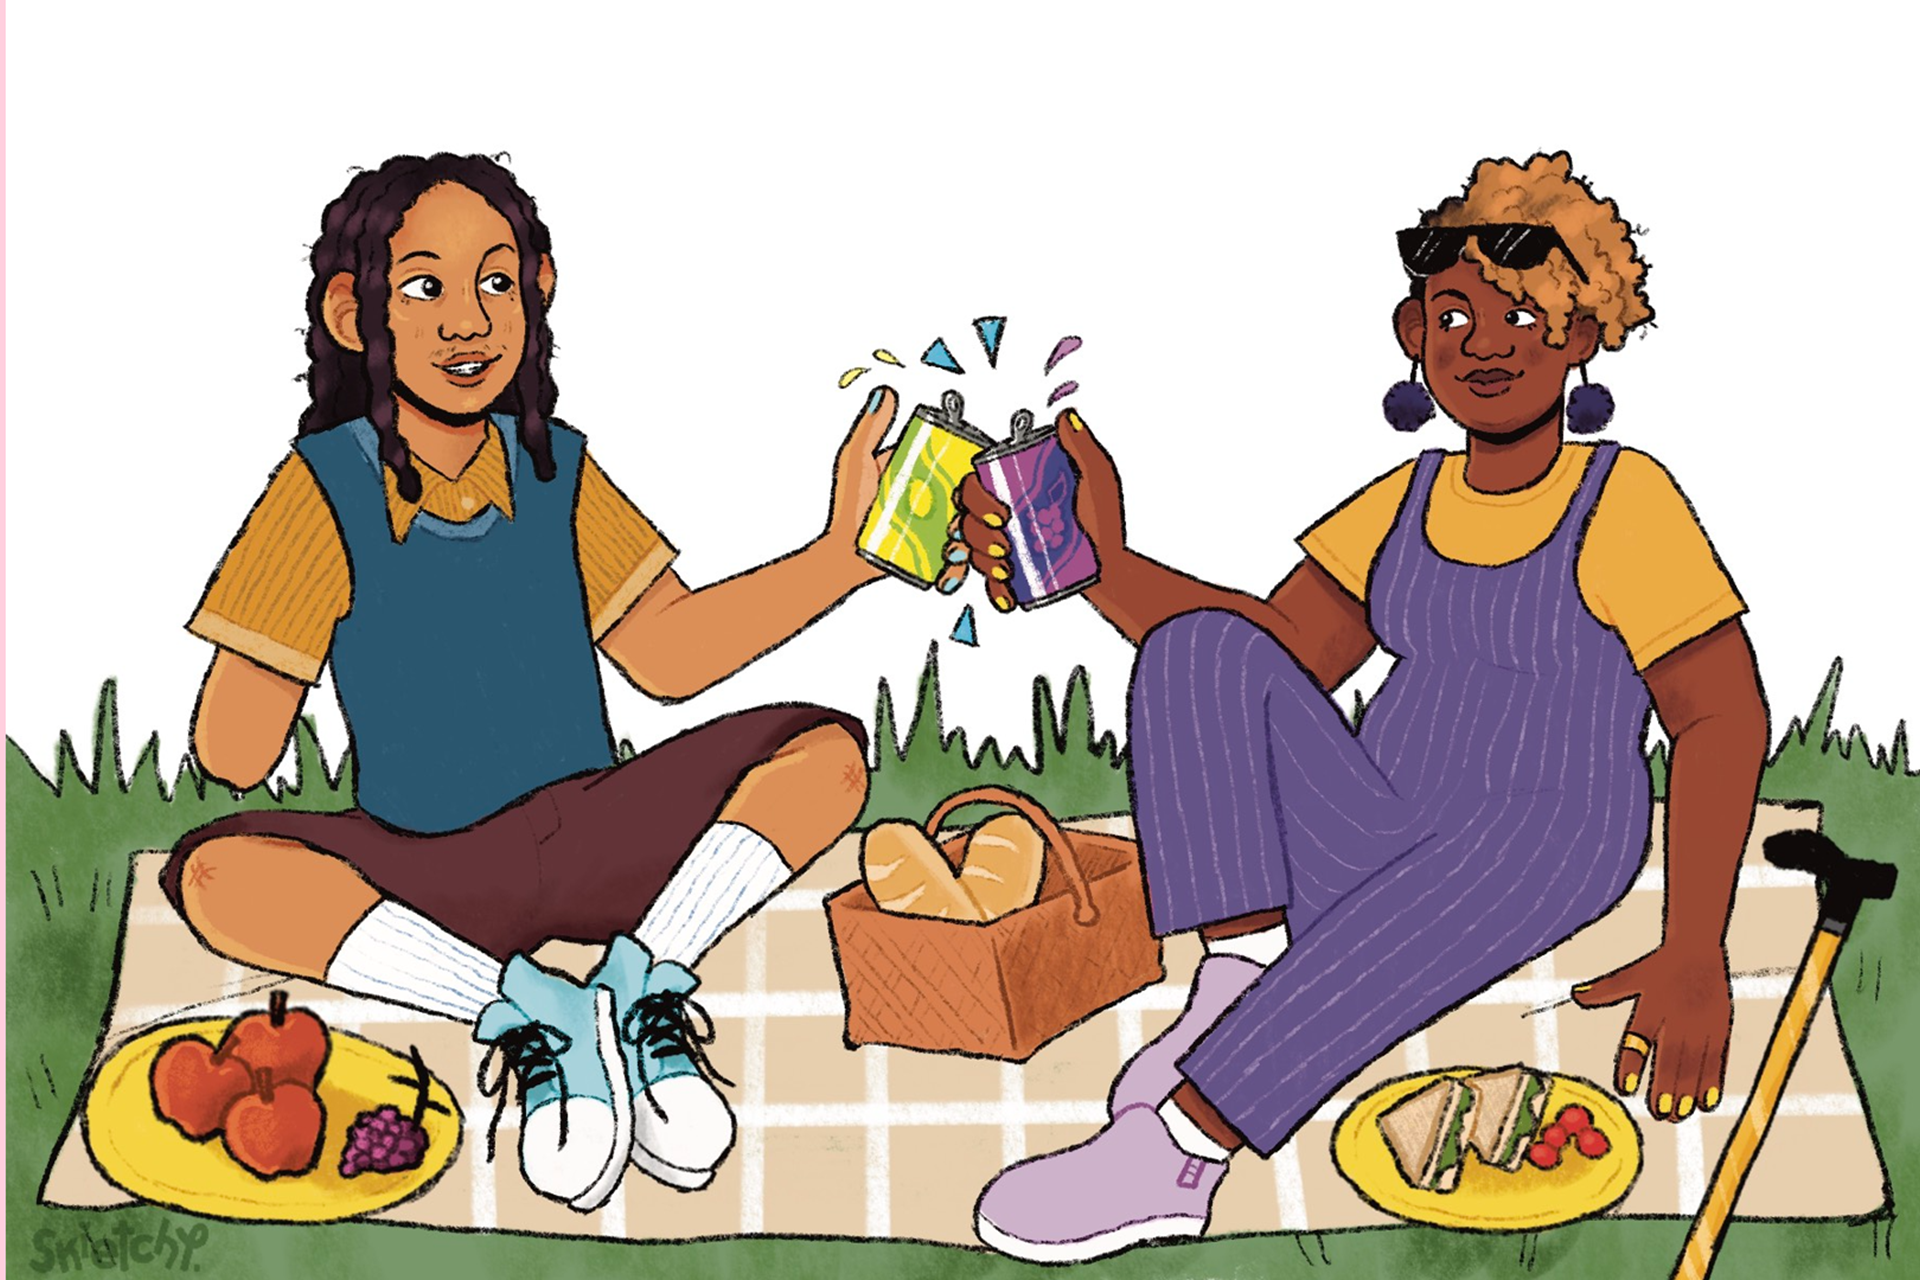 Two black young people having a picnic in a park. The character on the left in an amputee and the character on the right has a mobility aid.